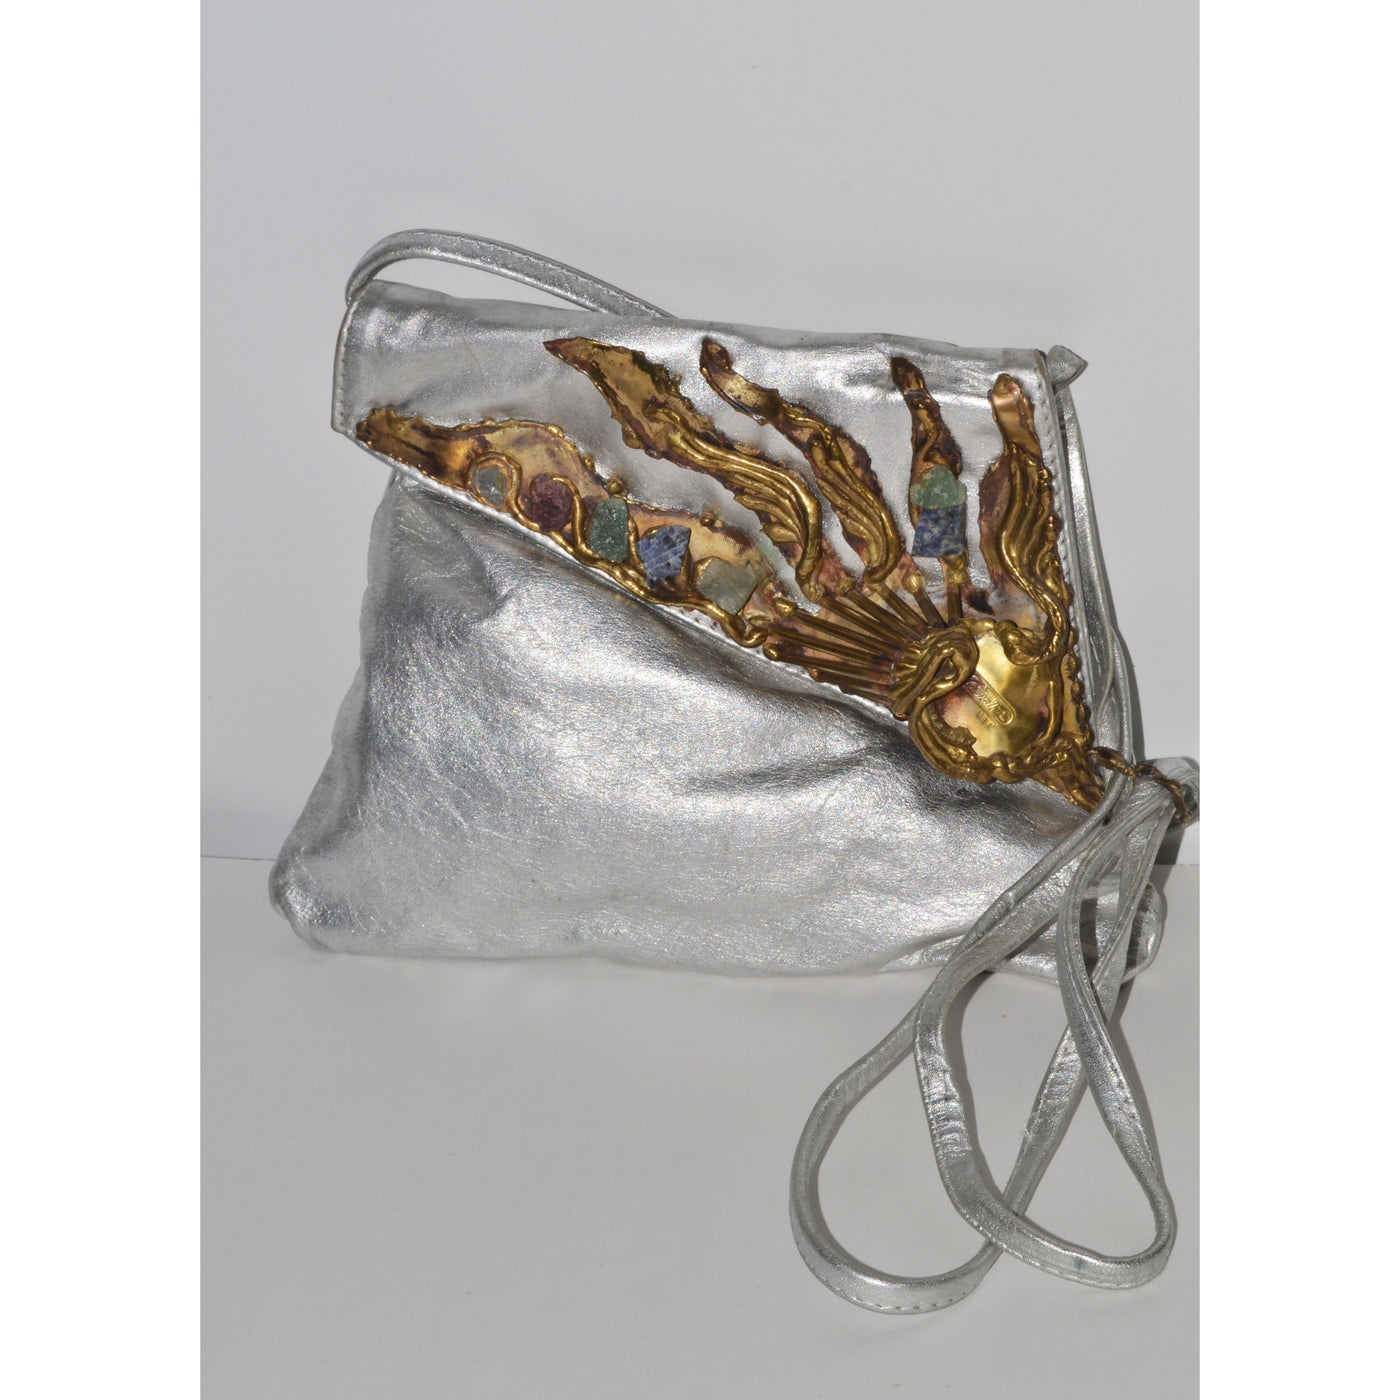 Vintage Silver Lame Wearable Art Purse By Carvalhu's Of Rio 